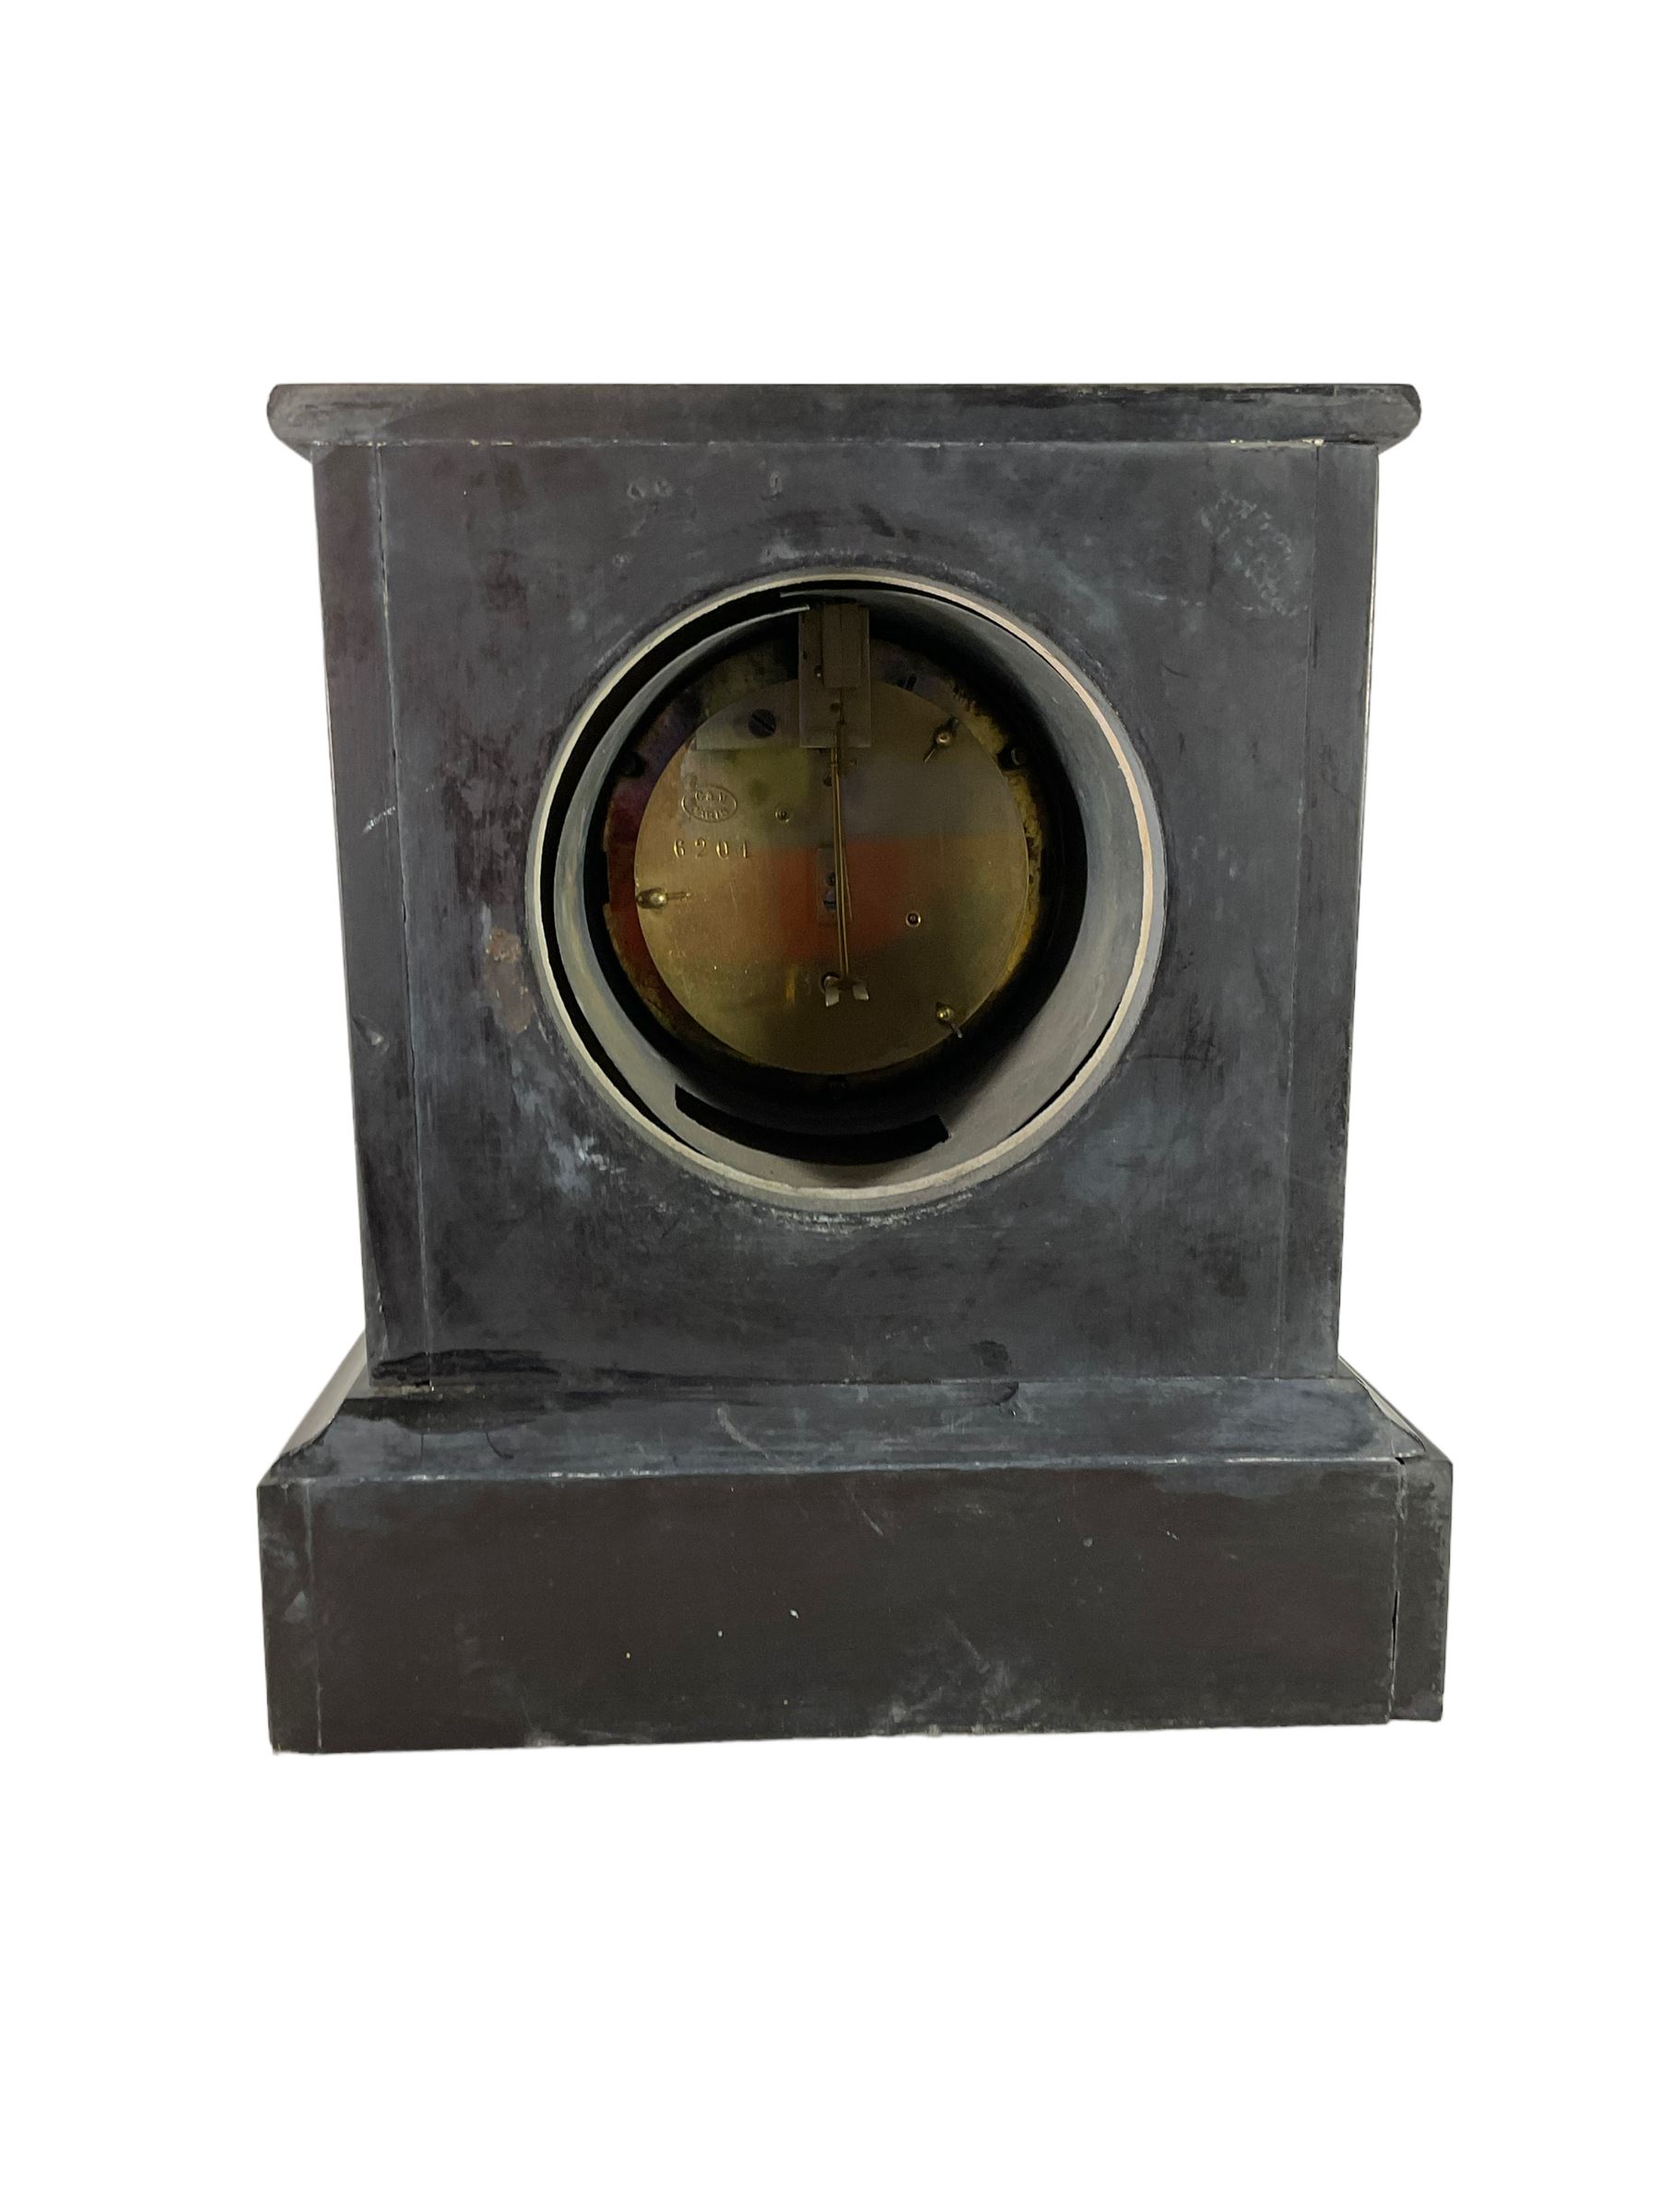 French - 19th century 8-day timepiece mantle clock. No pendulum. - Image 3 of 4